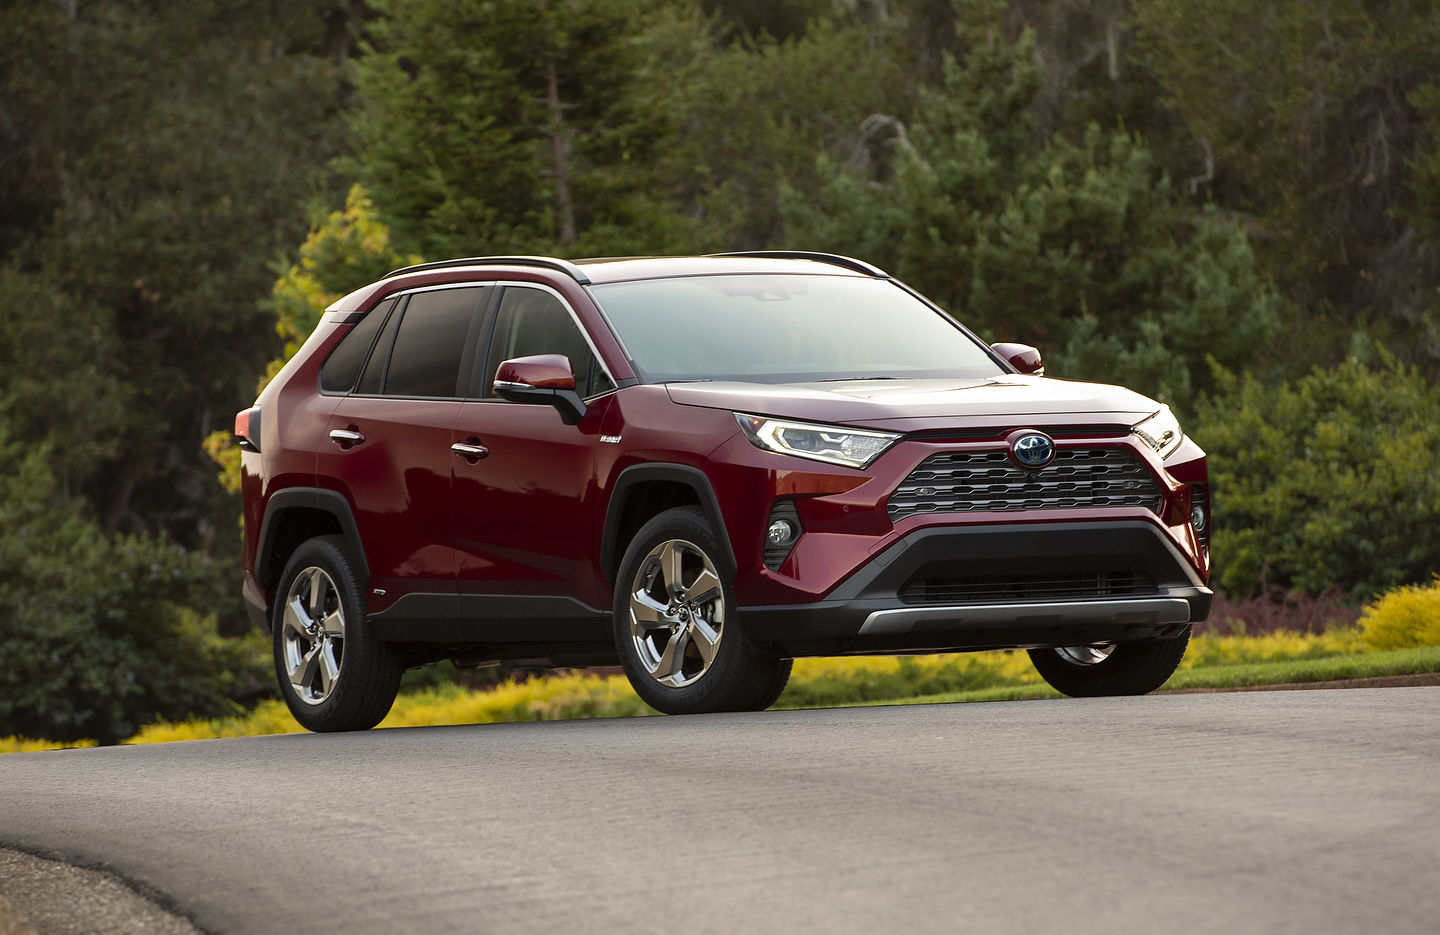 2019 Toyota RAV4 Hybrid: The one and only hybrid compact SUV